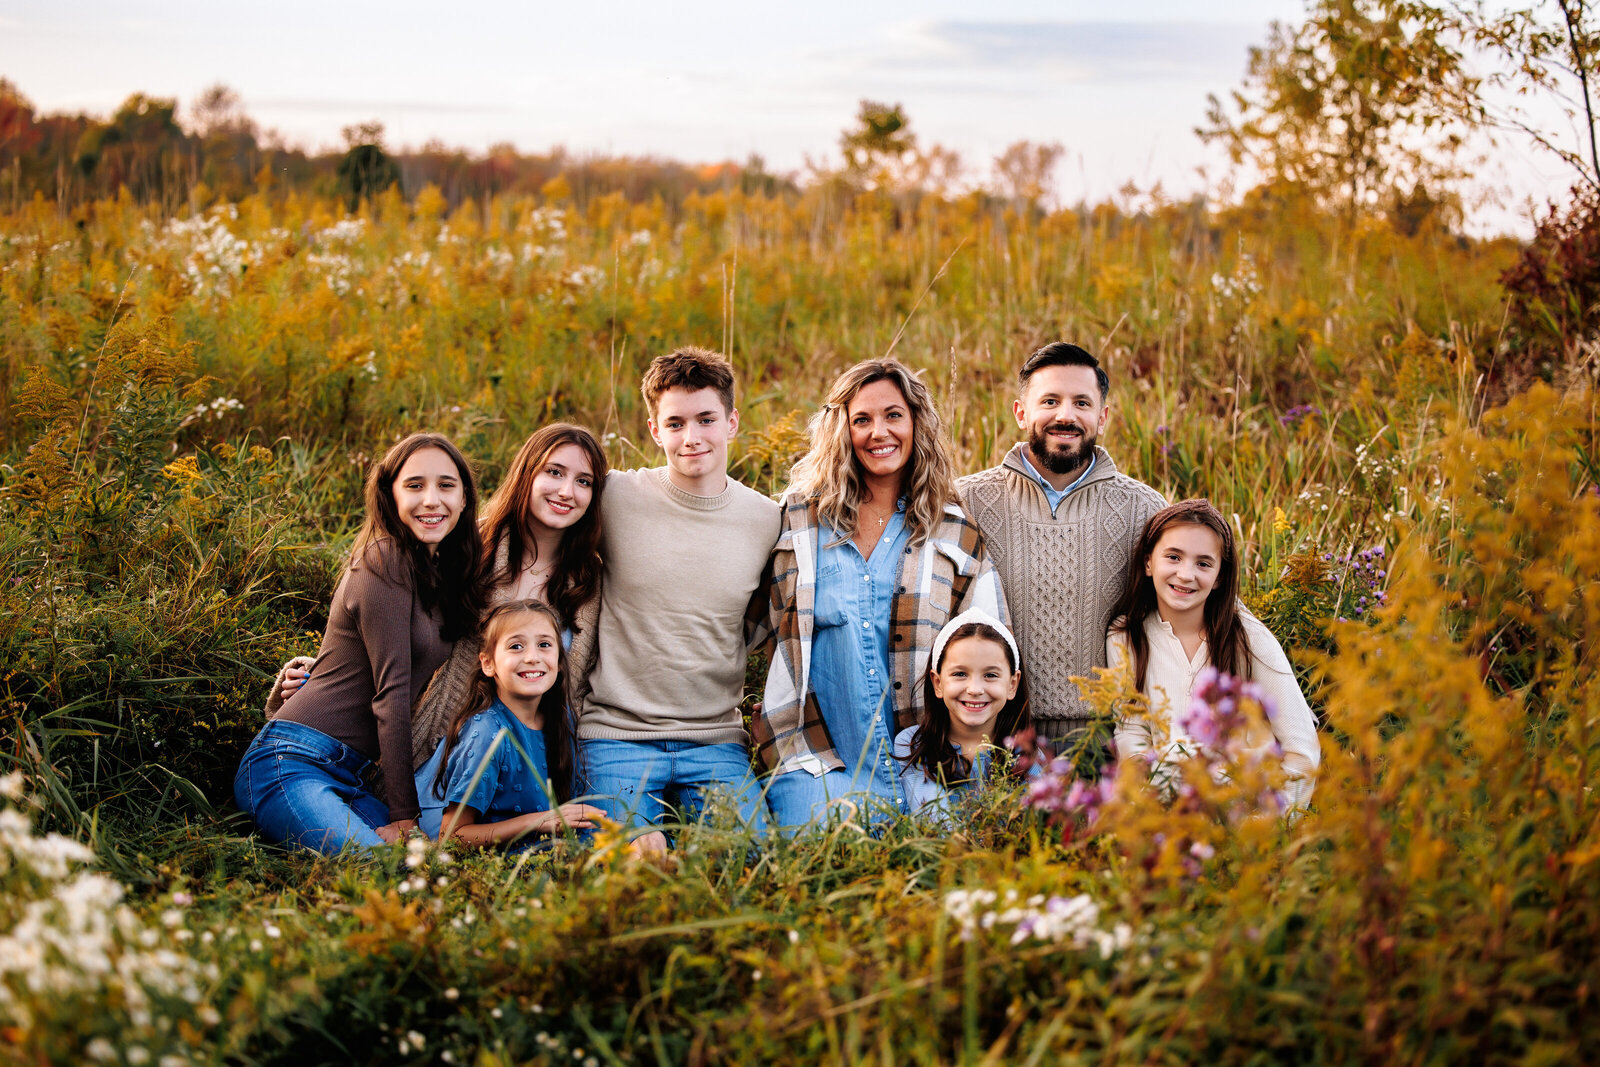 Large family of 8 sit together in a field of tall grasses for a photo